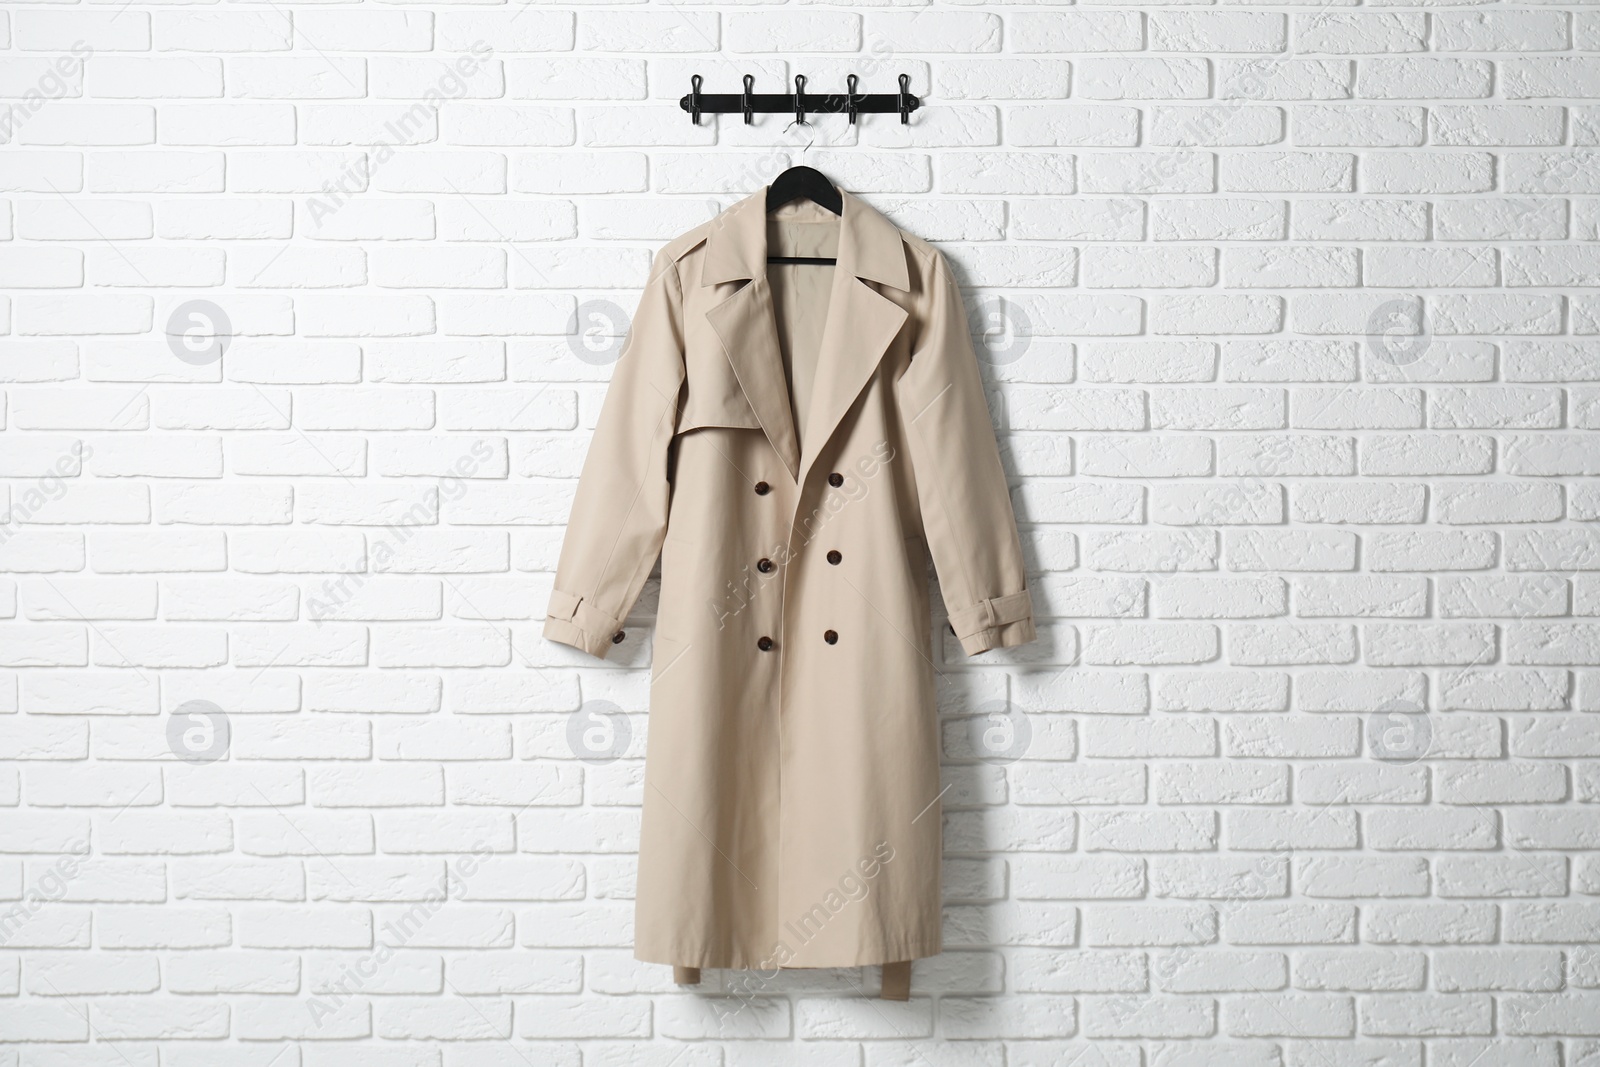 Photo of Hanger with beige coat on white brick wall